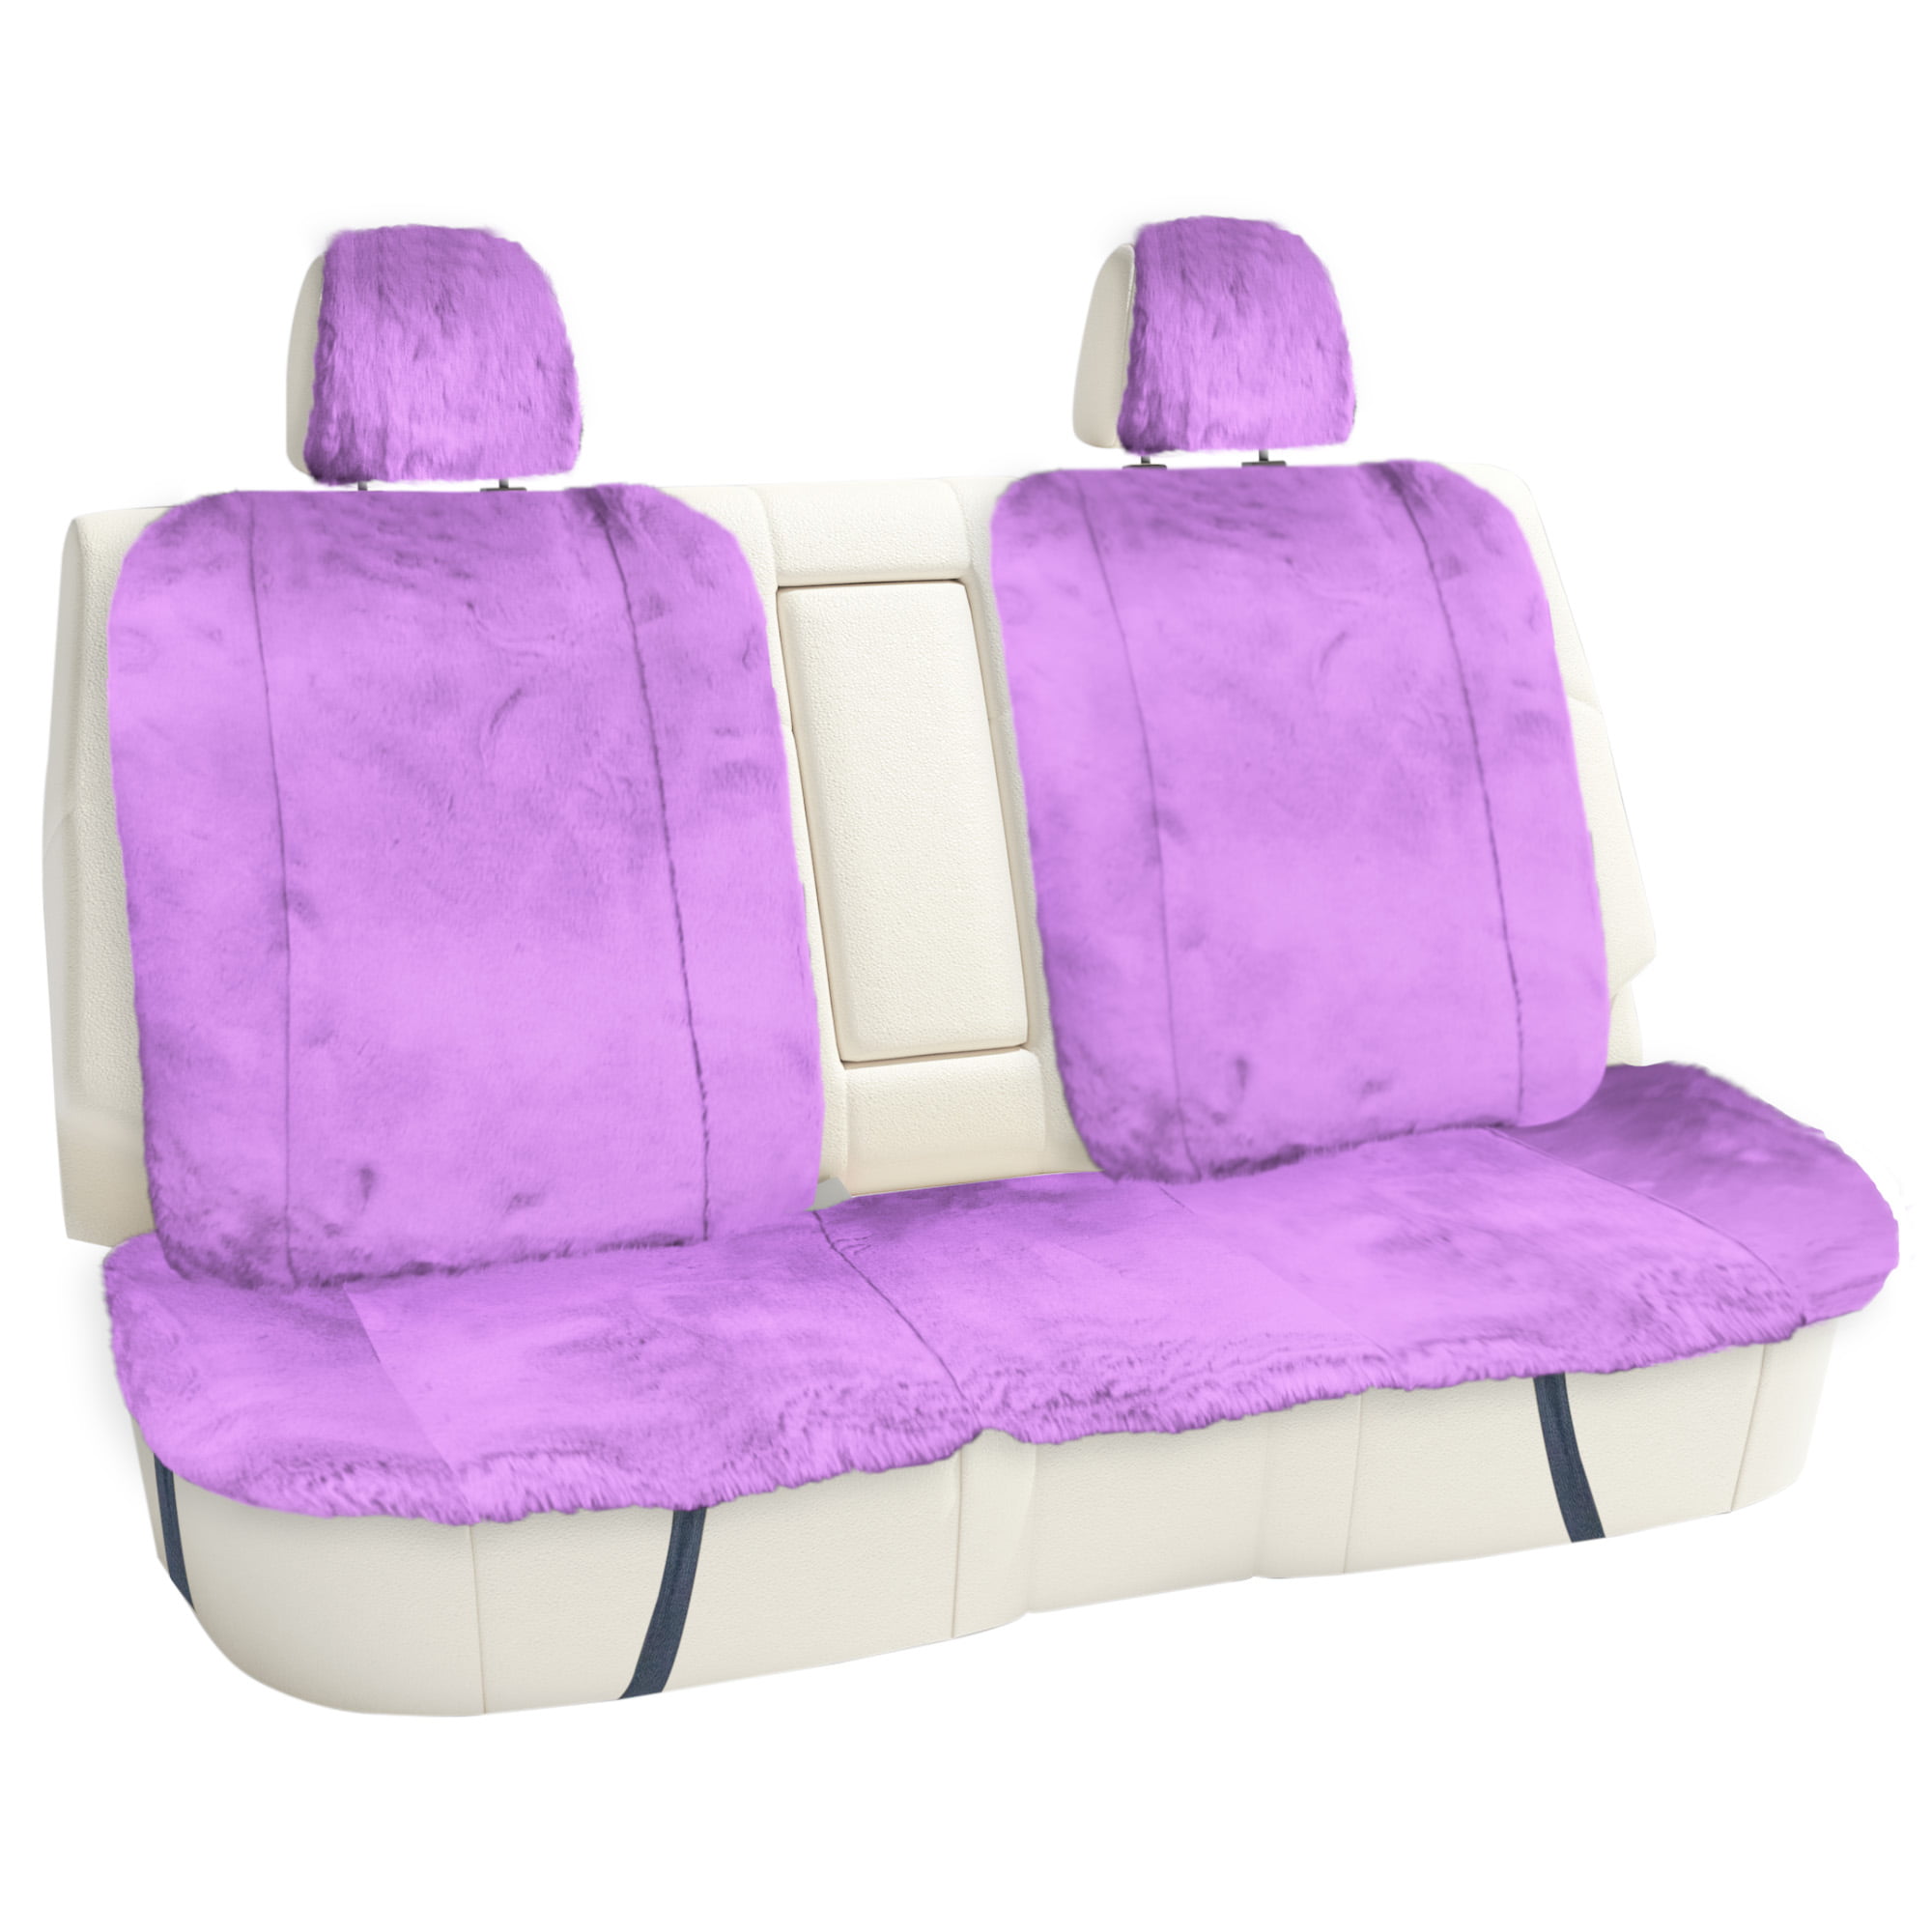 Luxury Thickened Plush Car Seat Cushion Set,Winter Universal Faux Fur Car  Seat Cushions Full Set Fluffy Non-Slip Front And Back Seat Covers Fuzzy Car